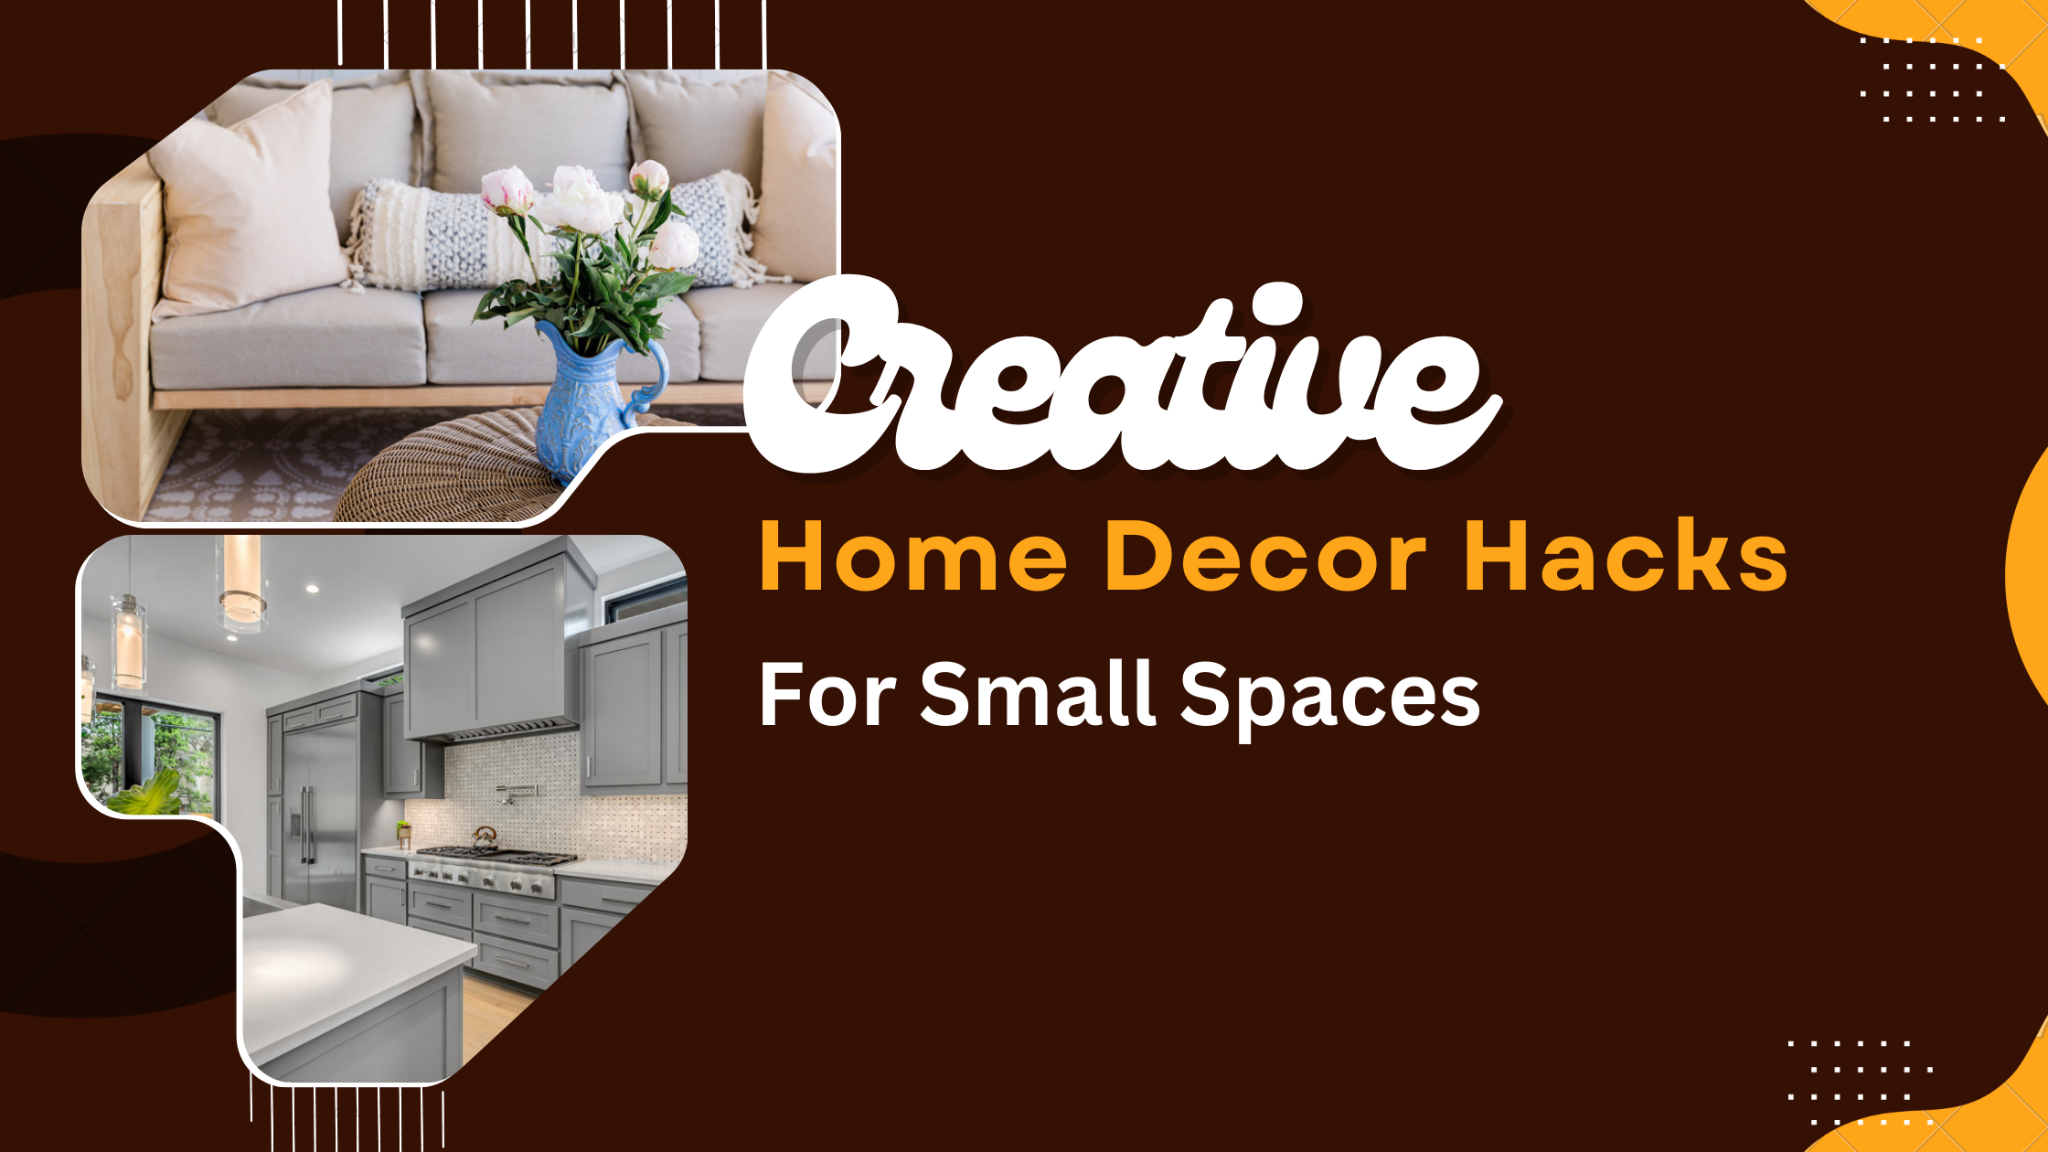 Home Decor Hacks For Small Spaces